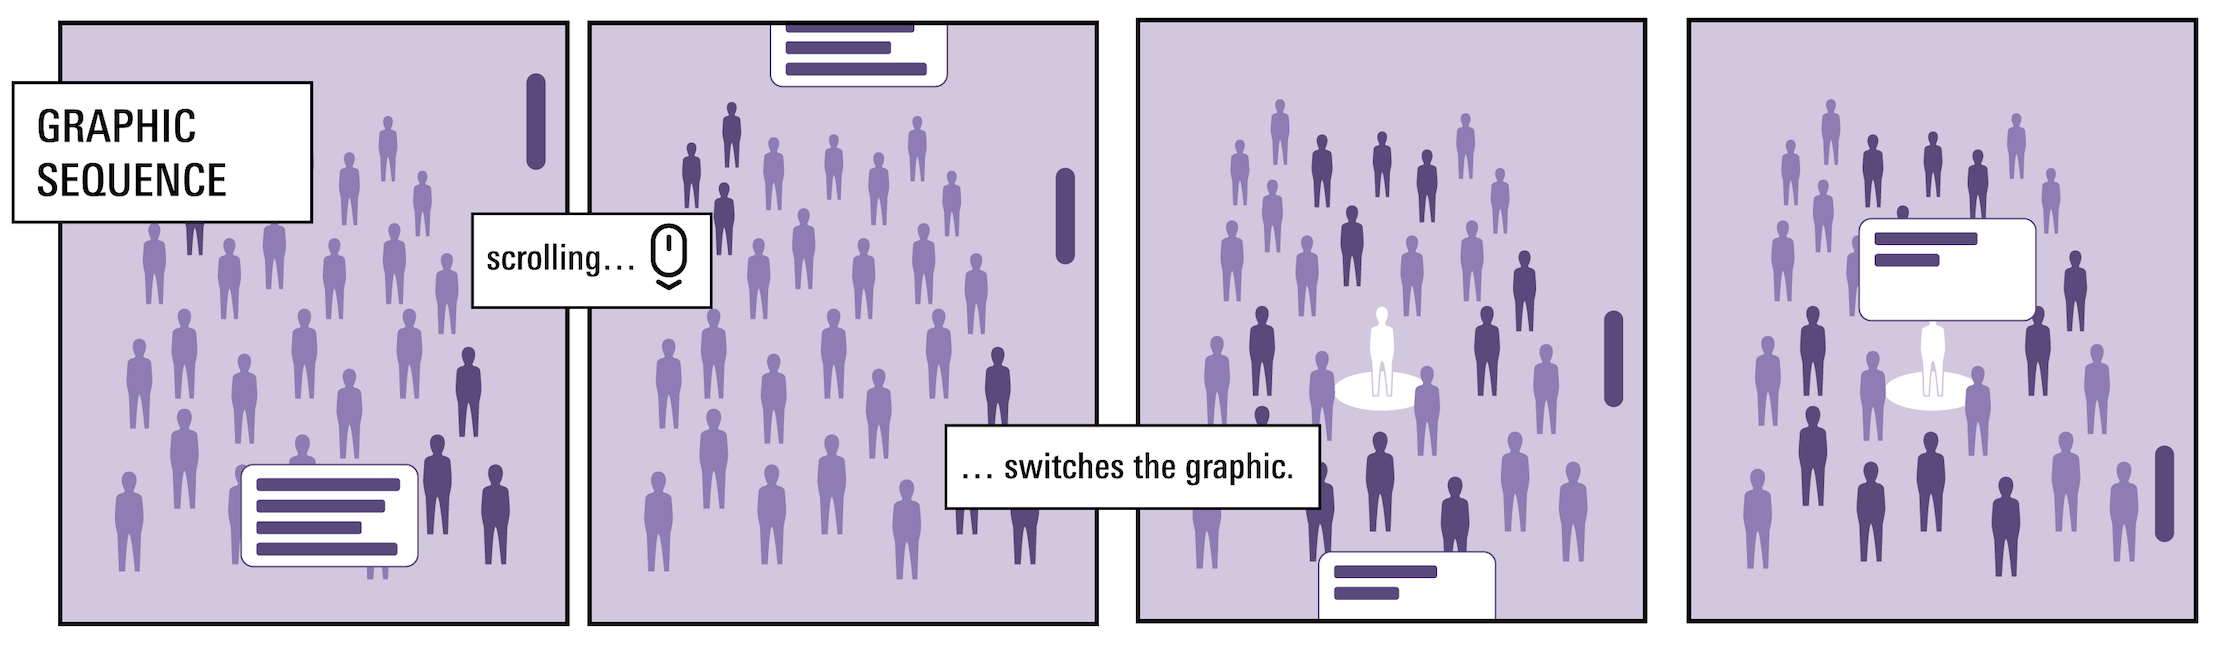 A four panel illustration of how graphic sequences work, with the text 'Scrolling... switches the graphic'